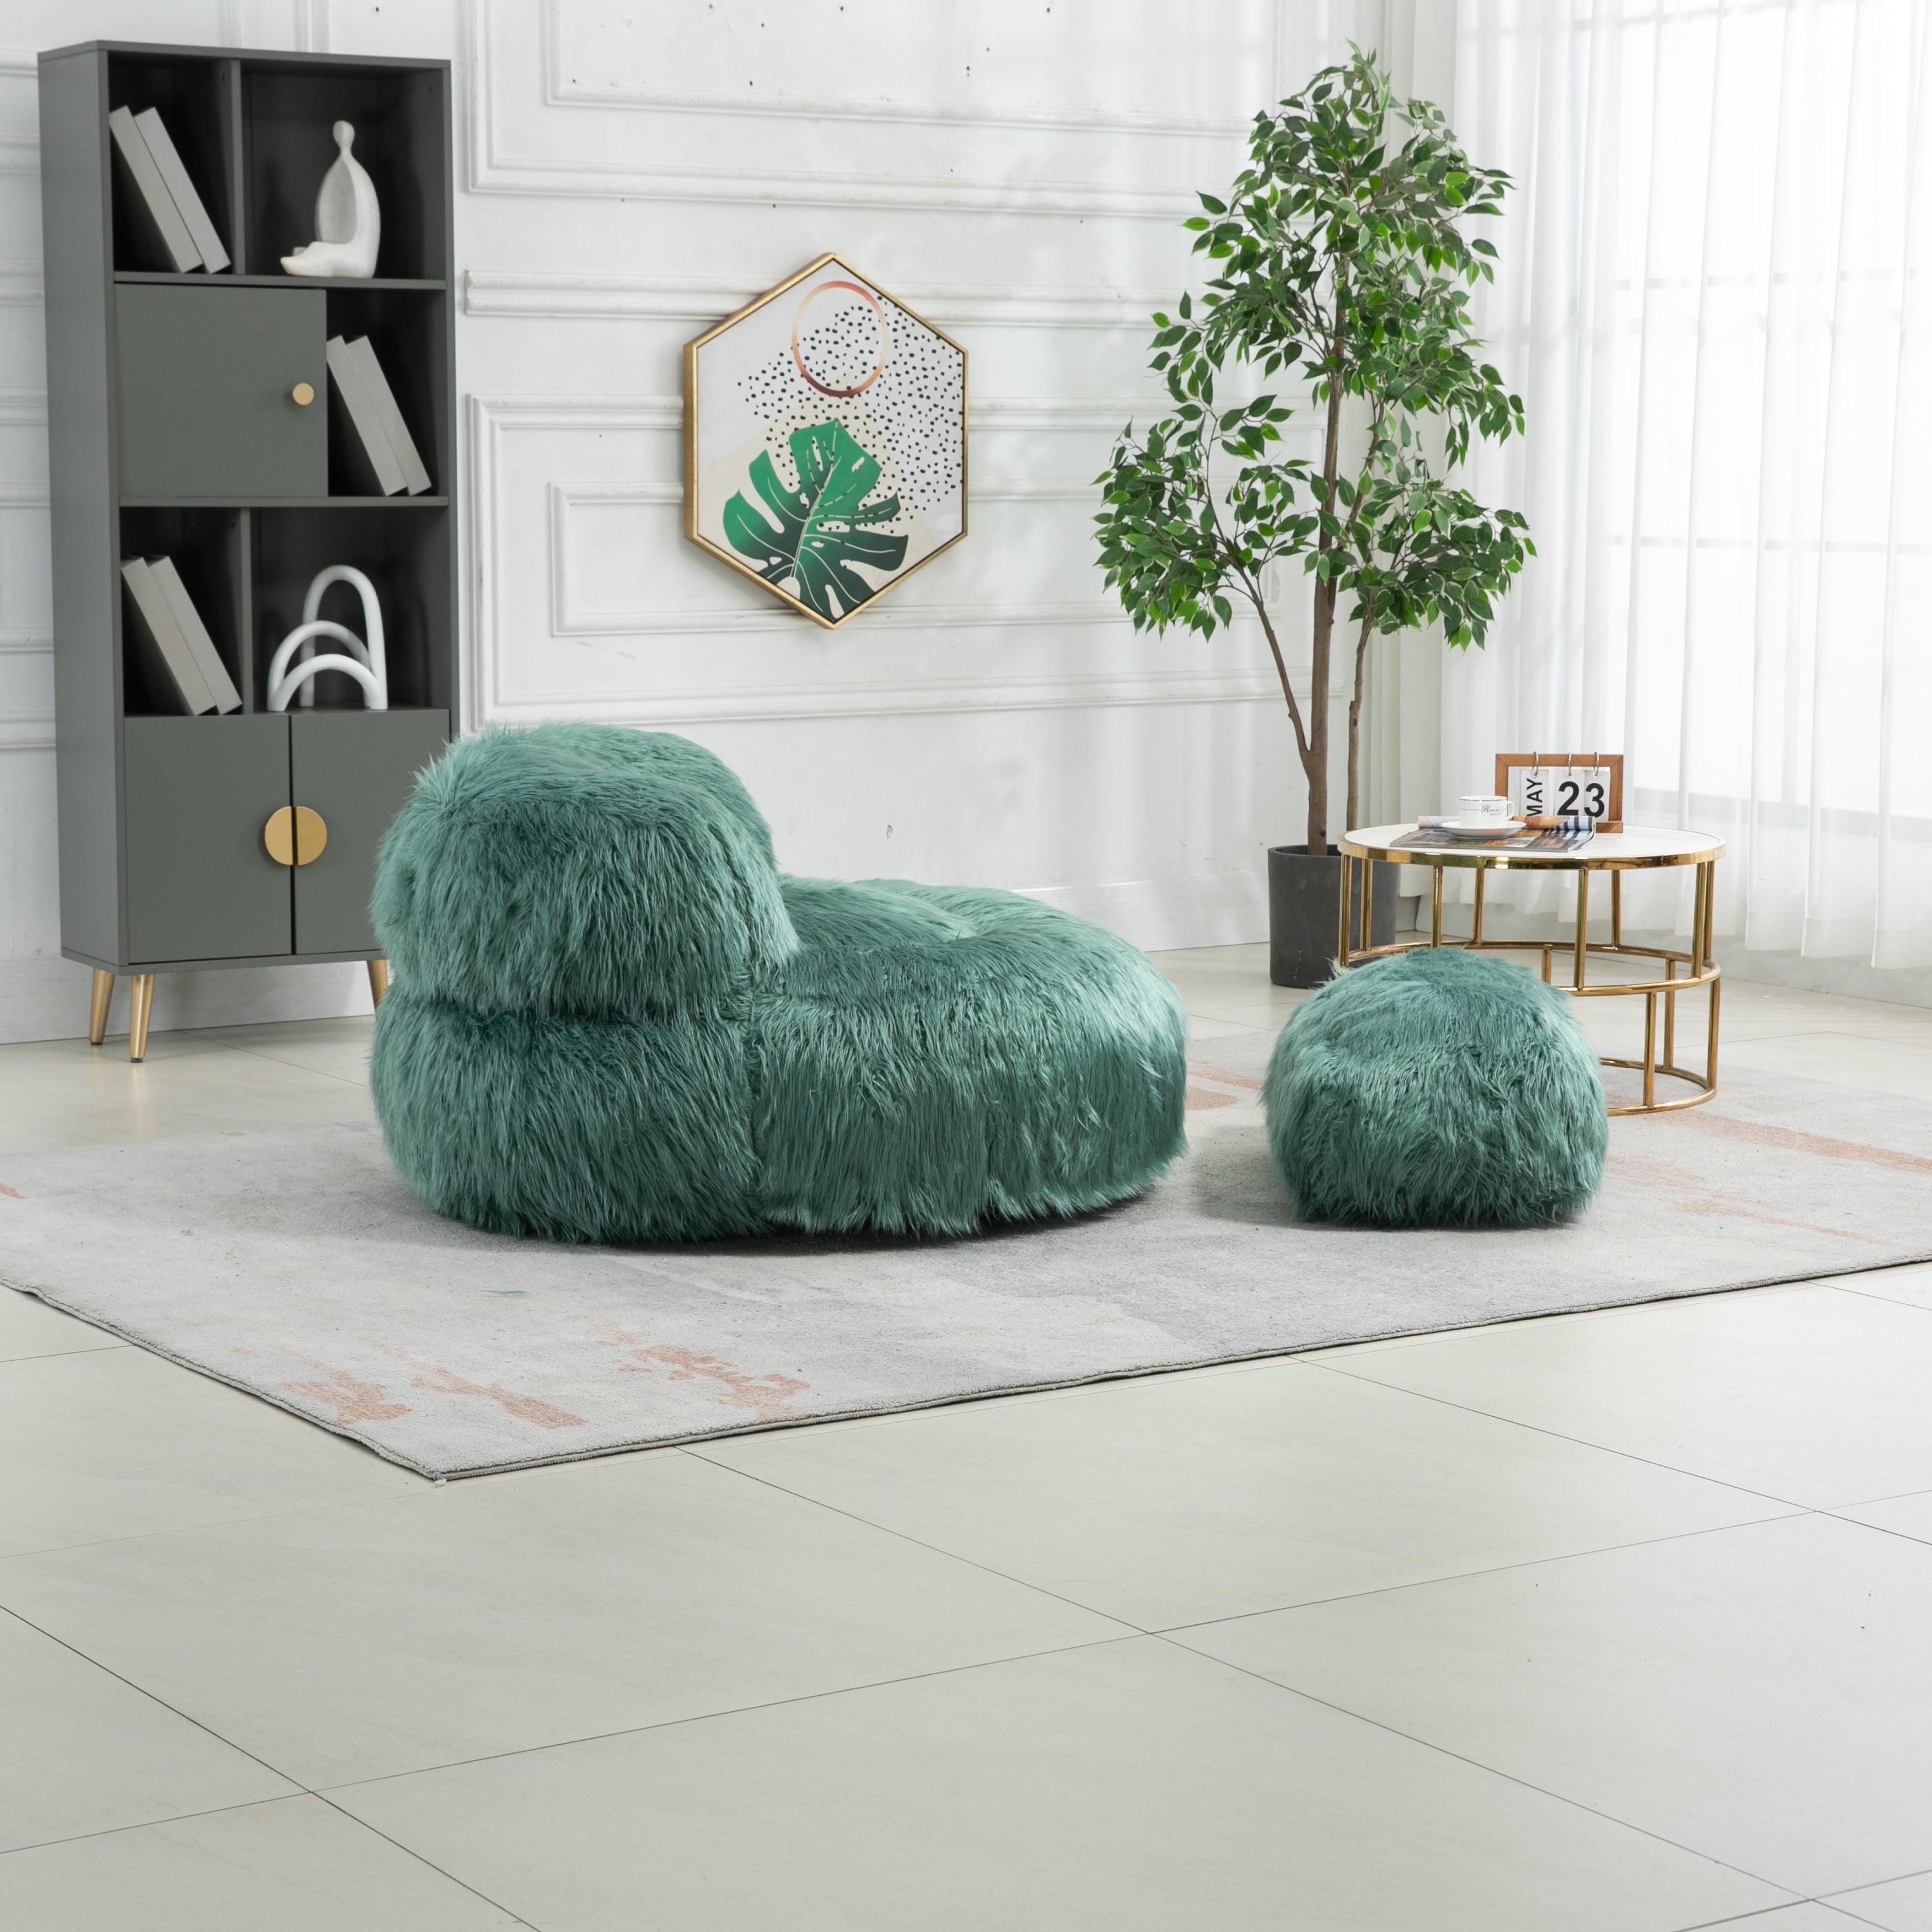 Gramanda 2-In-1 Bean Bag Chair Faux Fur Lazy Sofa & Ottoman Footstool For Adults And Kids - Green